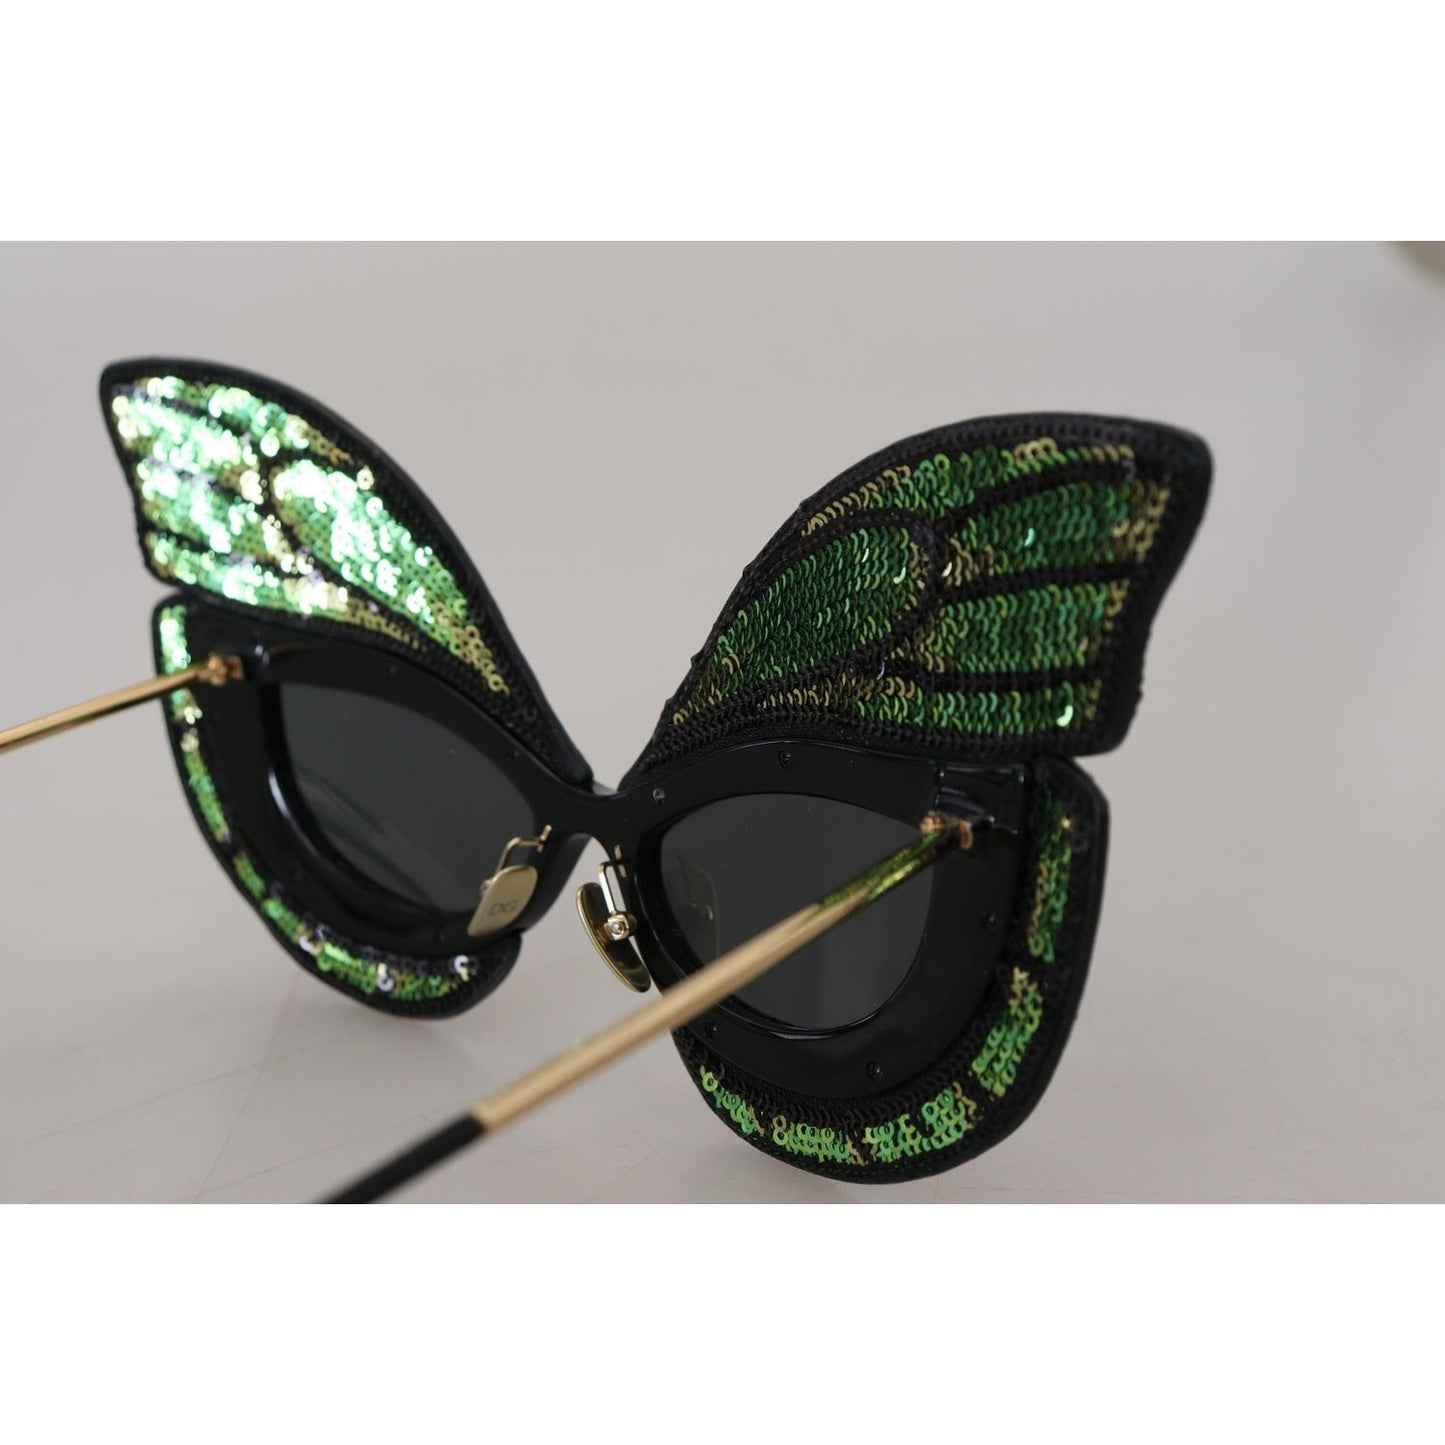 Dolce & Gabbana Exquisite Sequined Butterfly Sunglasses exquisite-sequined-butterfly-sunglasses IMG_4079-scaled-659c5a0a-22c.jpg